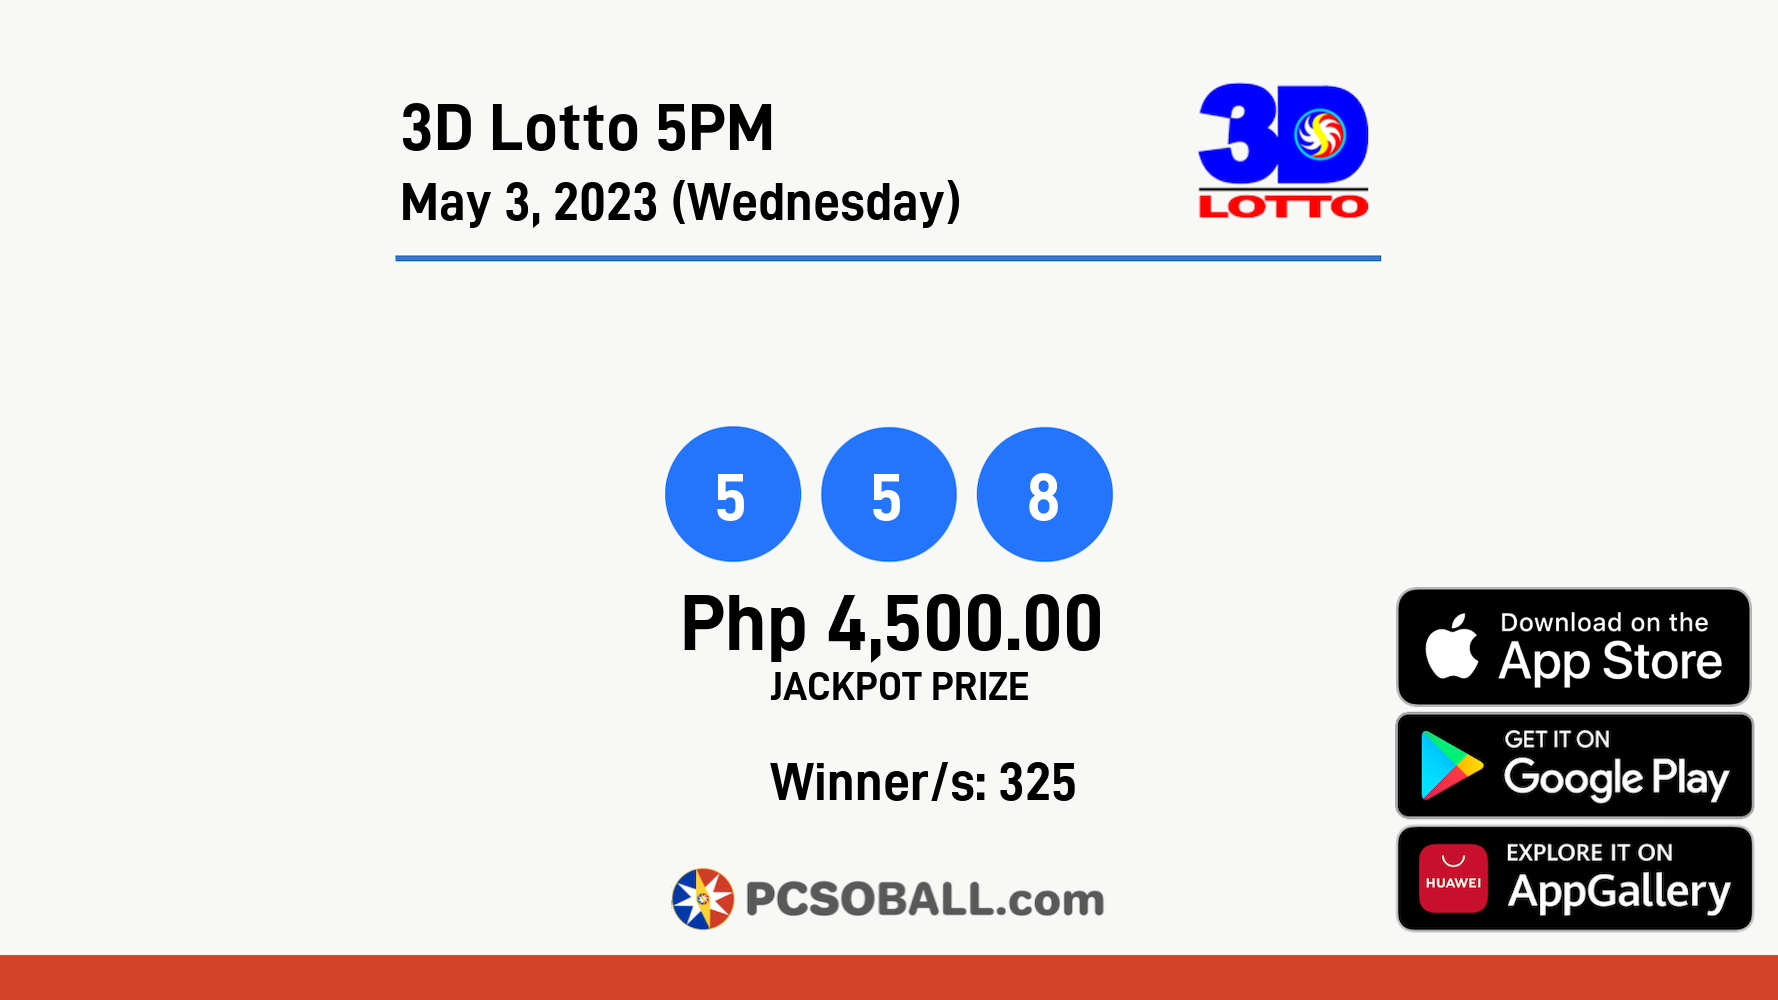 3D Lotto 5PM May 3, 2023 (Wednesday) Result